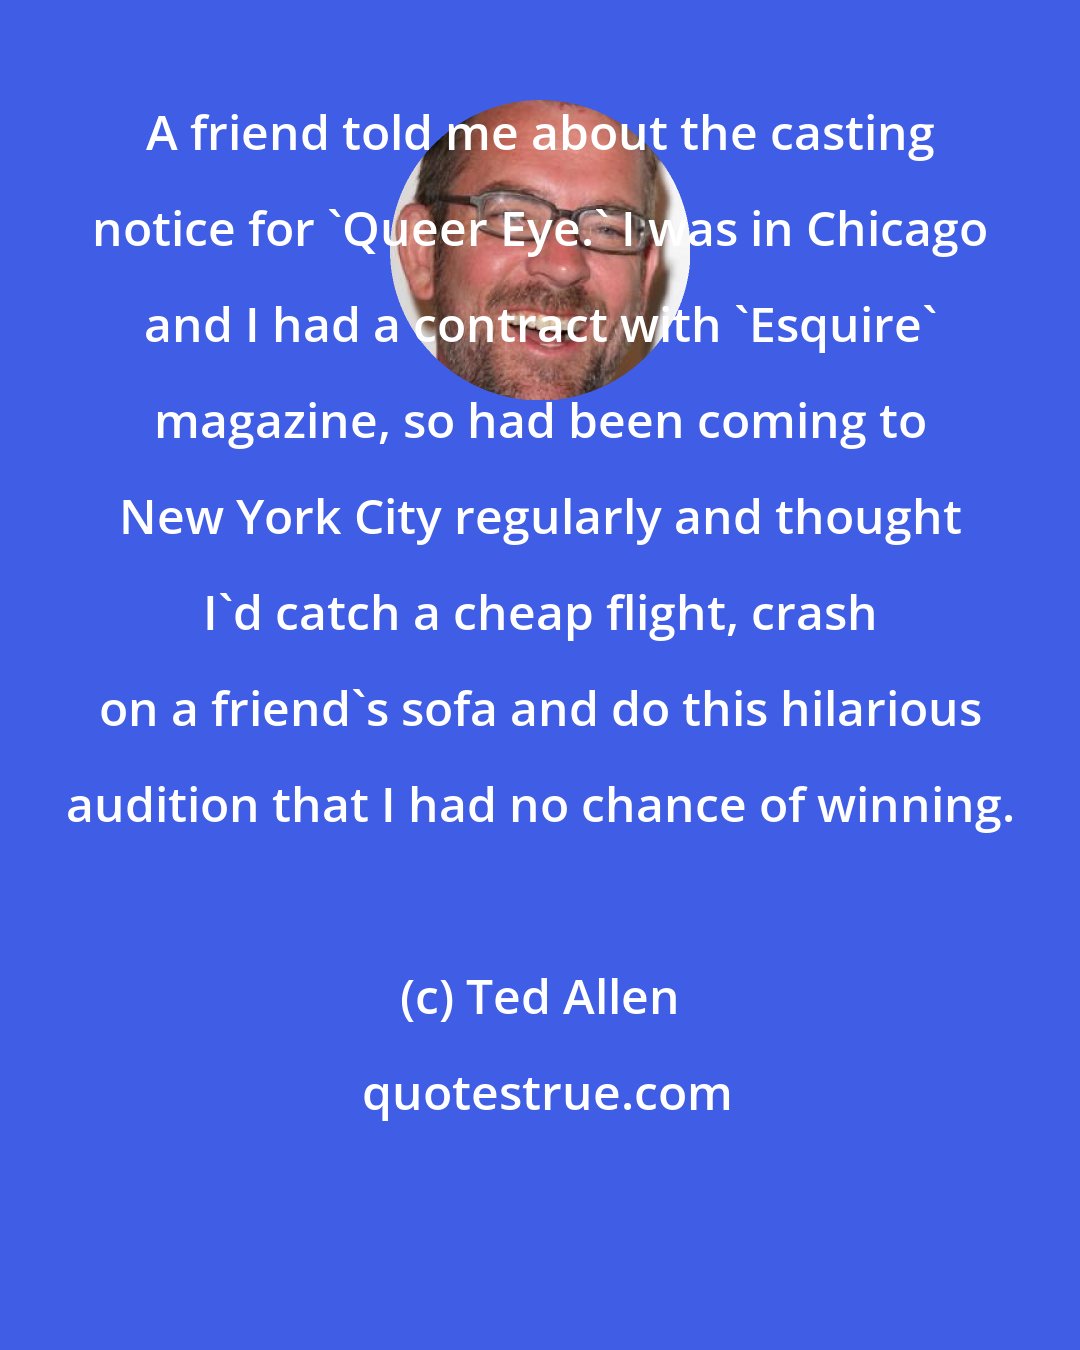 Ted Allen: A friend told me about the casting notice for 'Queer Eye.' I was in Chicago and I had a contract with 'Esquire' magazine, so had been coming to New York City regularly and thought I'd catch a cheap flight, crash on a friend's sofa and do this hilarious audition that I had no chance of winning.